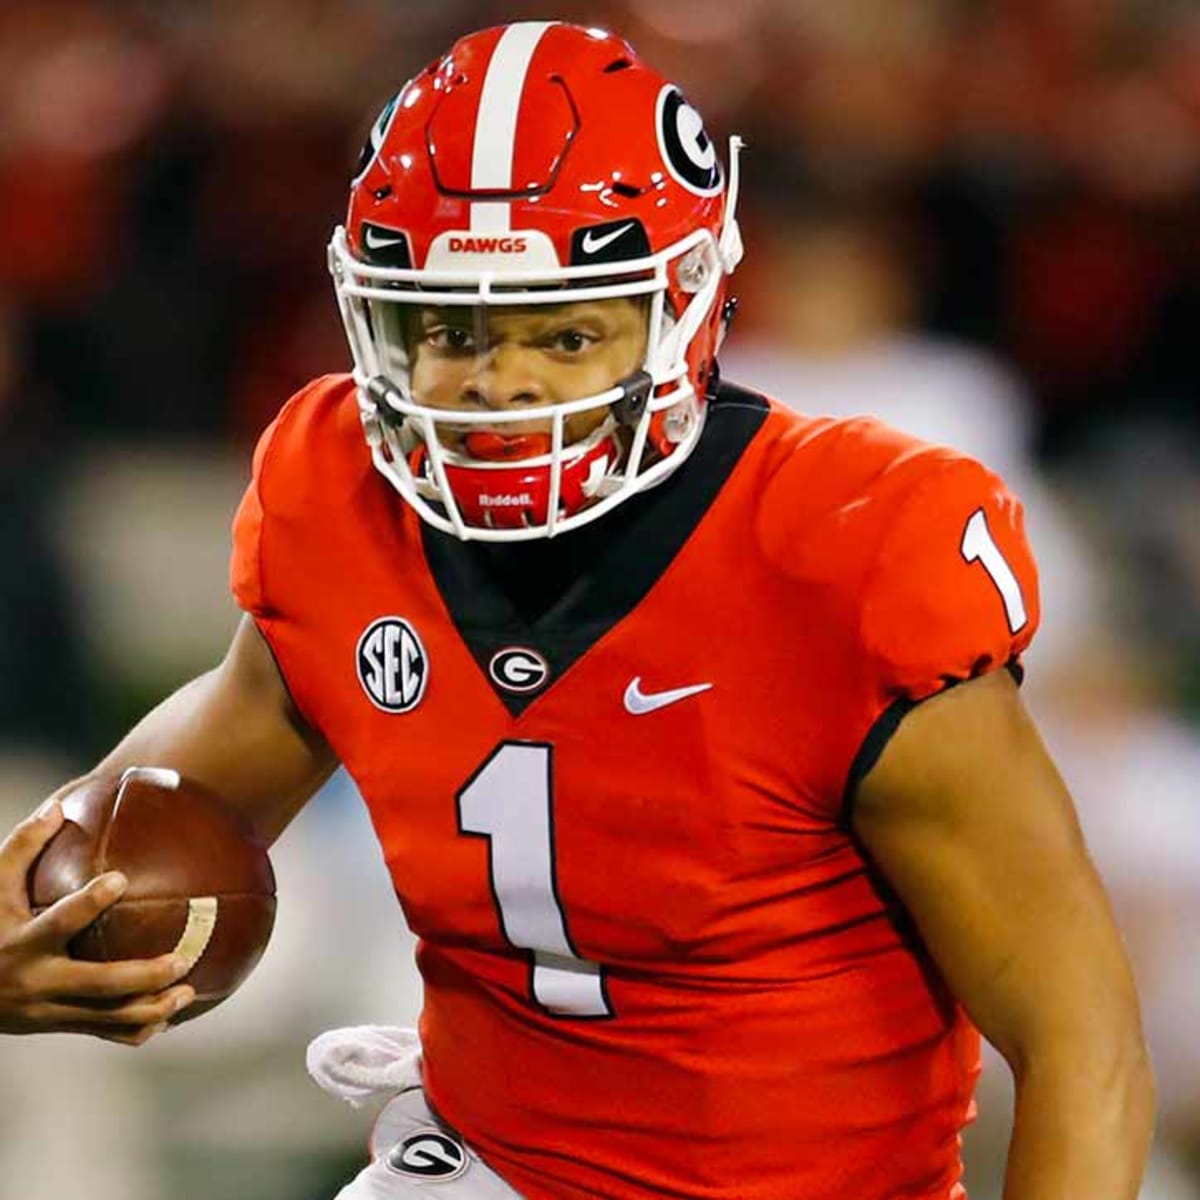 Justin Fields transfer: What and where next for the UGA QB